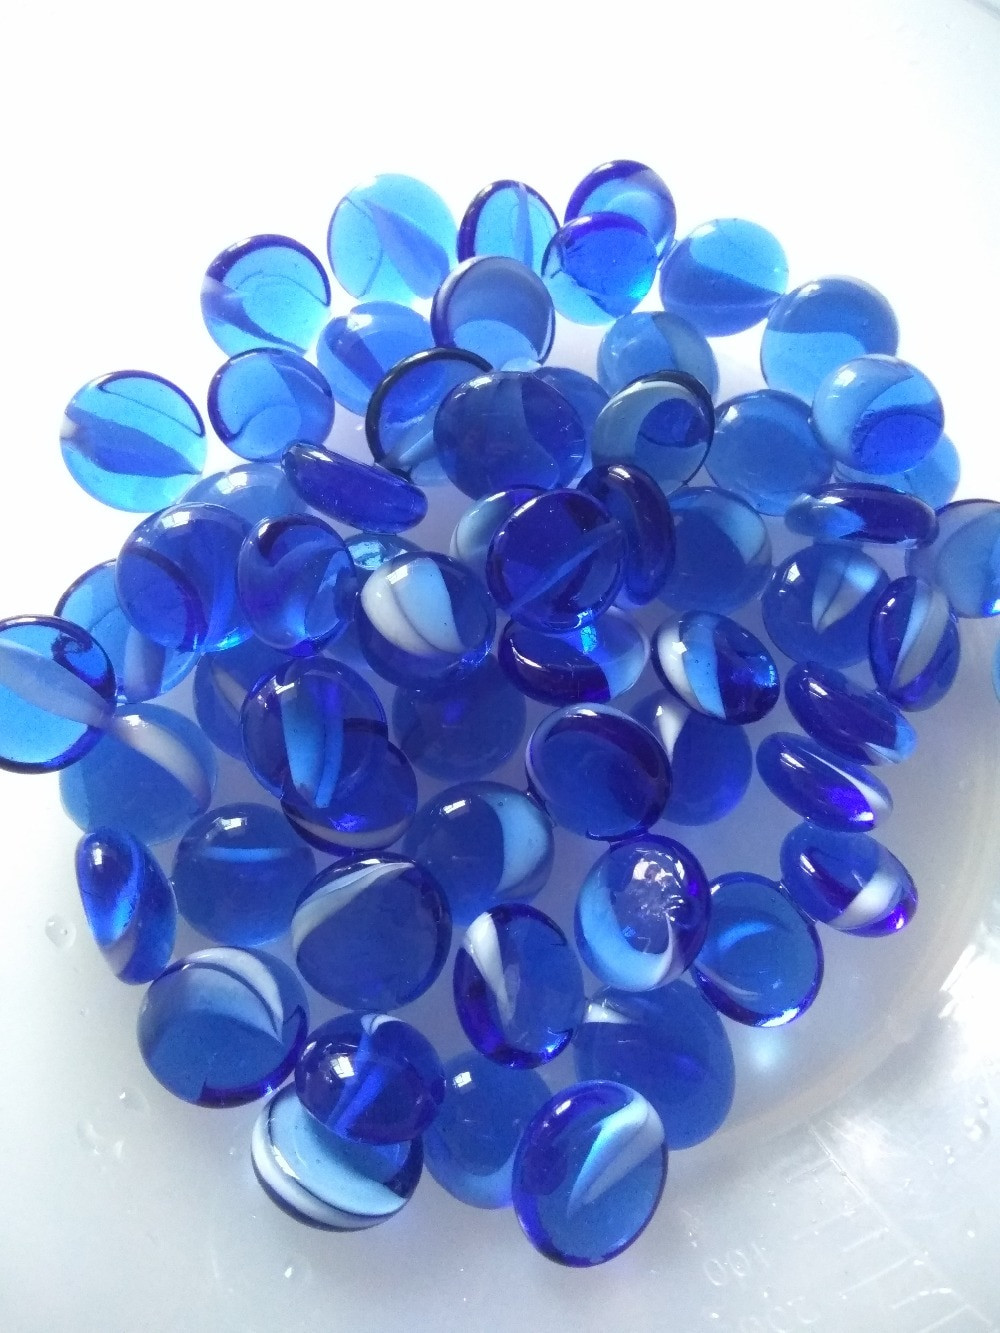 29 Nice Gold Vase Filler Beads 2024 free download gold vase filler beads of aliexpress com buy blue white color flat glass beads cats eye with regard to aliexpress com buy blue white color flat glass beads cats eye stickers home fish tank v